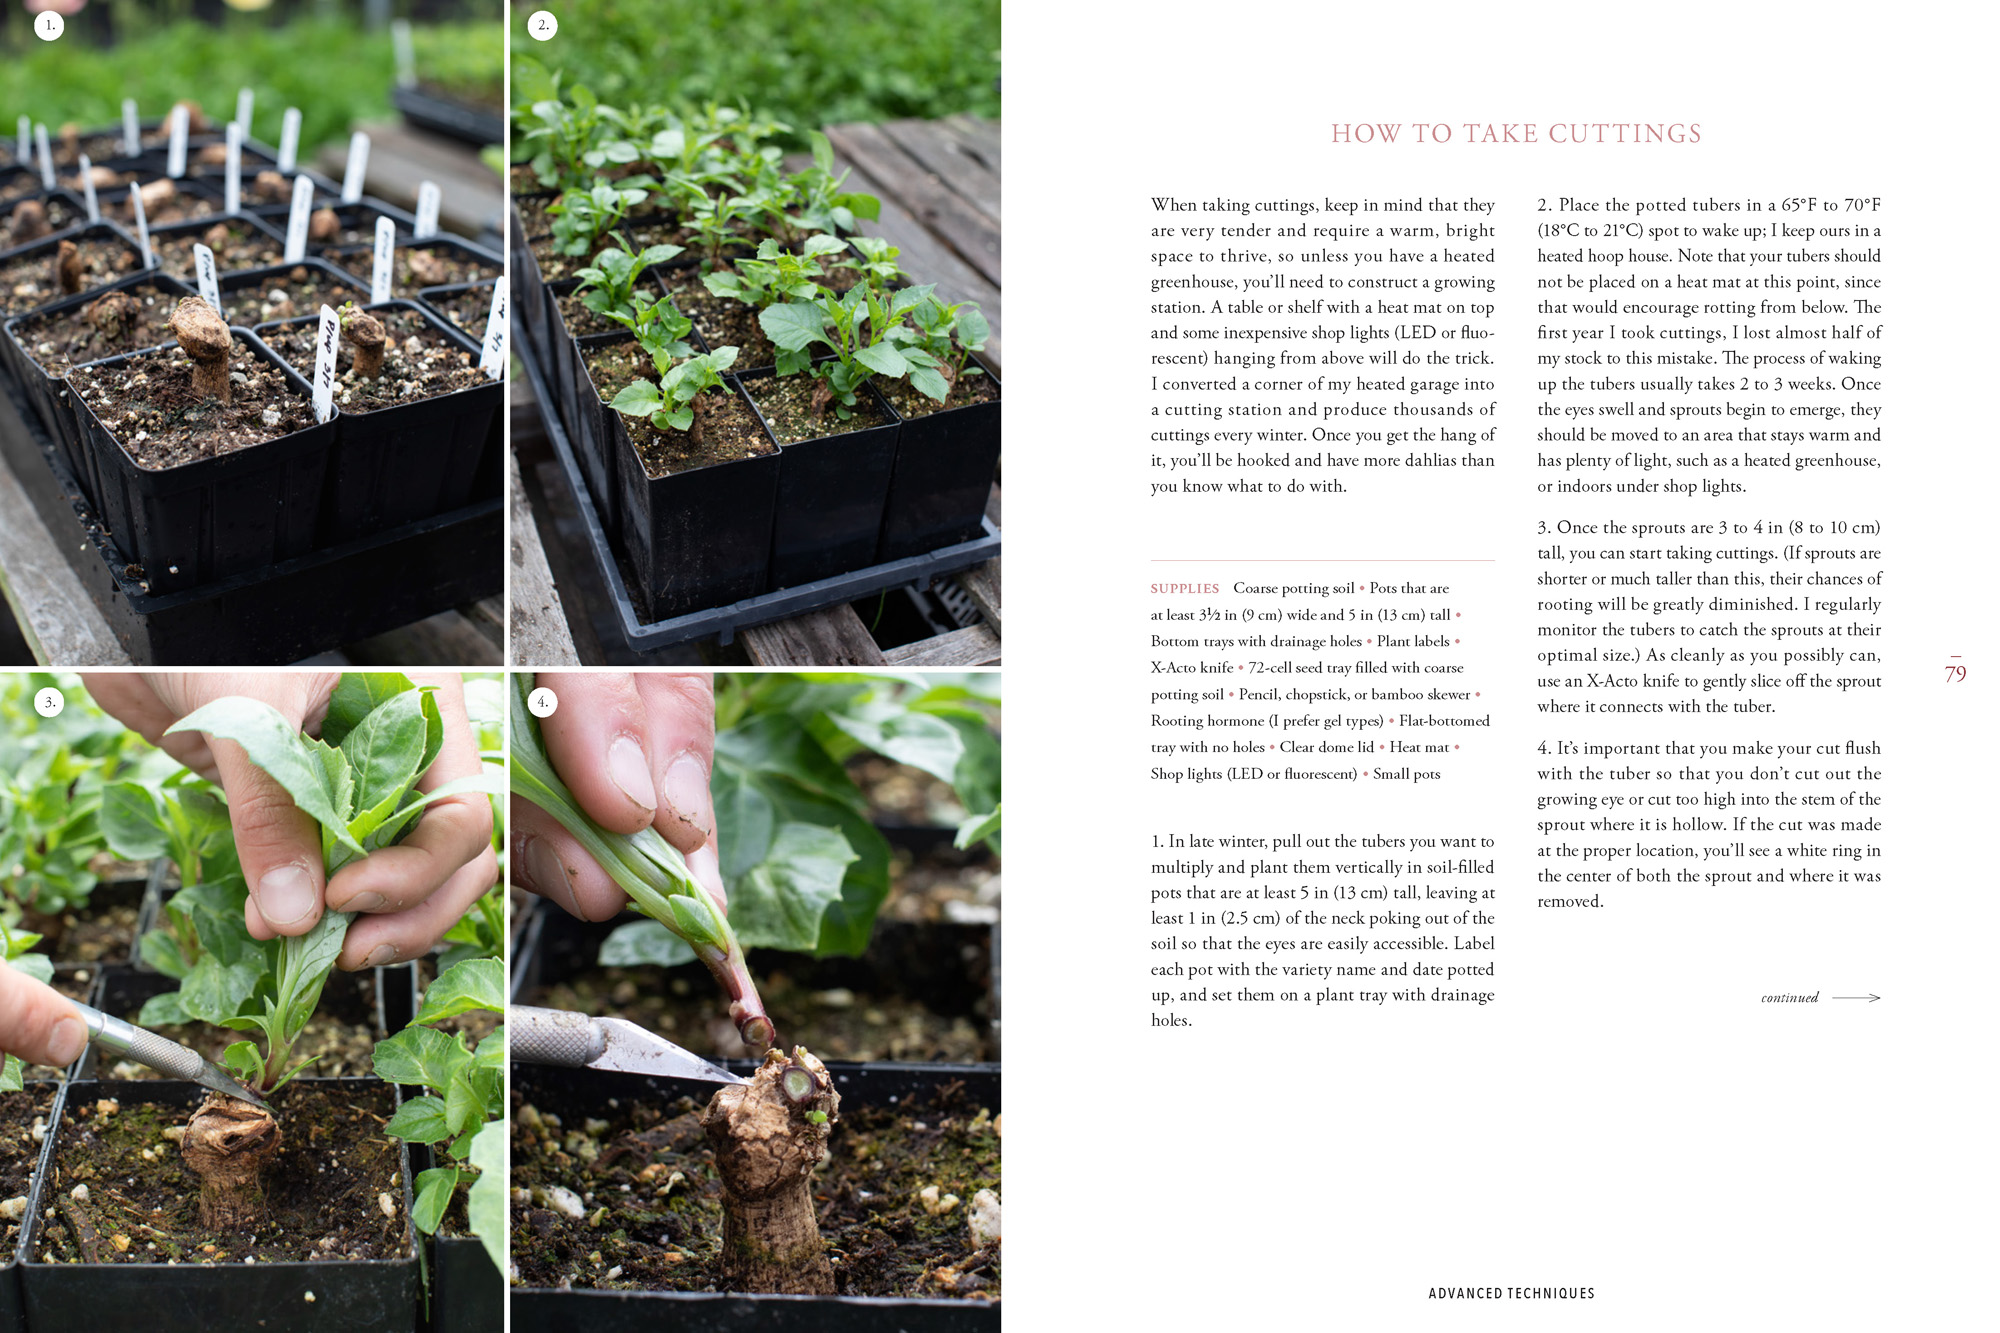 A page from Floret Farm's Discovering Dahlias showing how to take dahlia cuttings